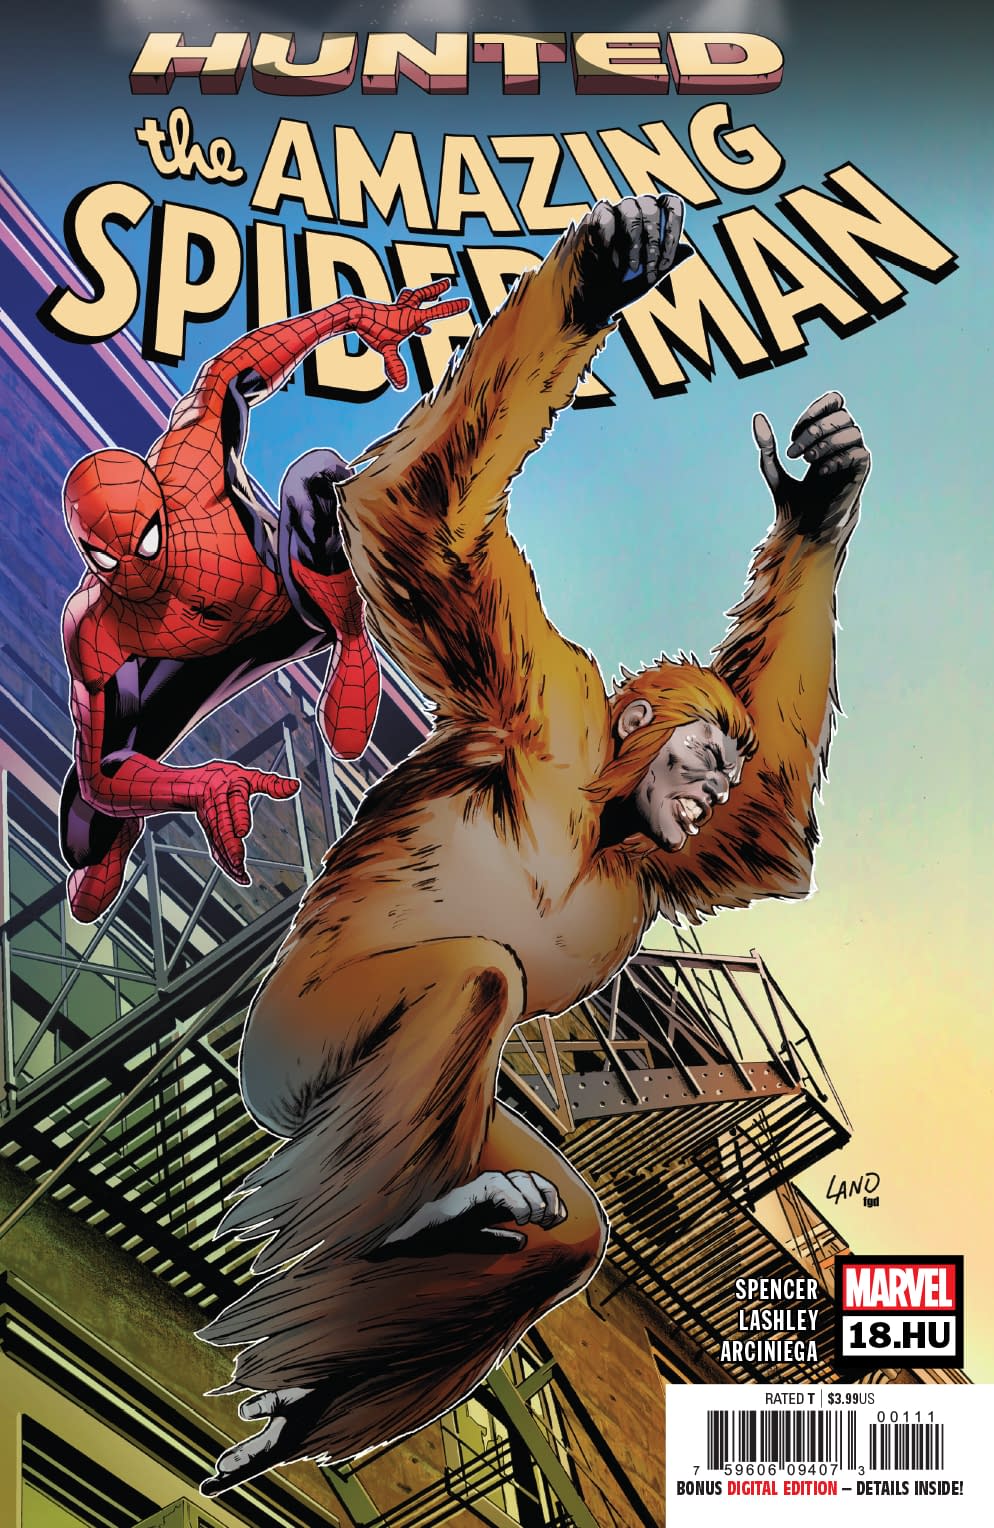 Sympathy for The Gibbon in Next Week's Amazing Spider-Man 18.HU